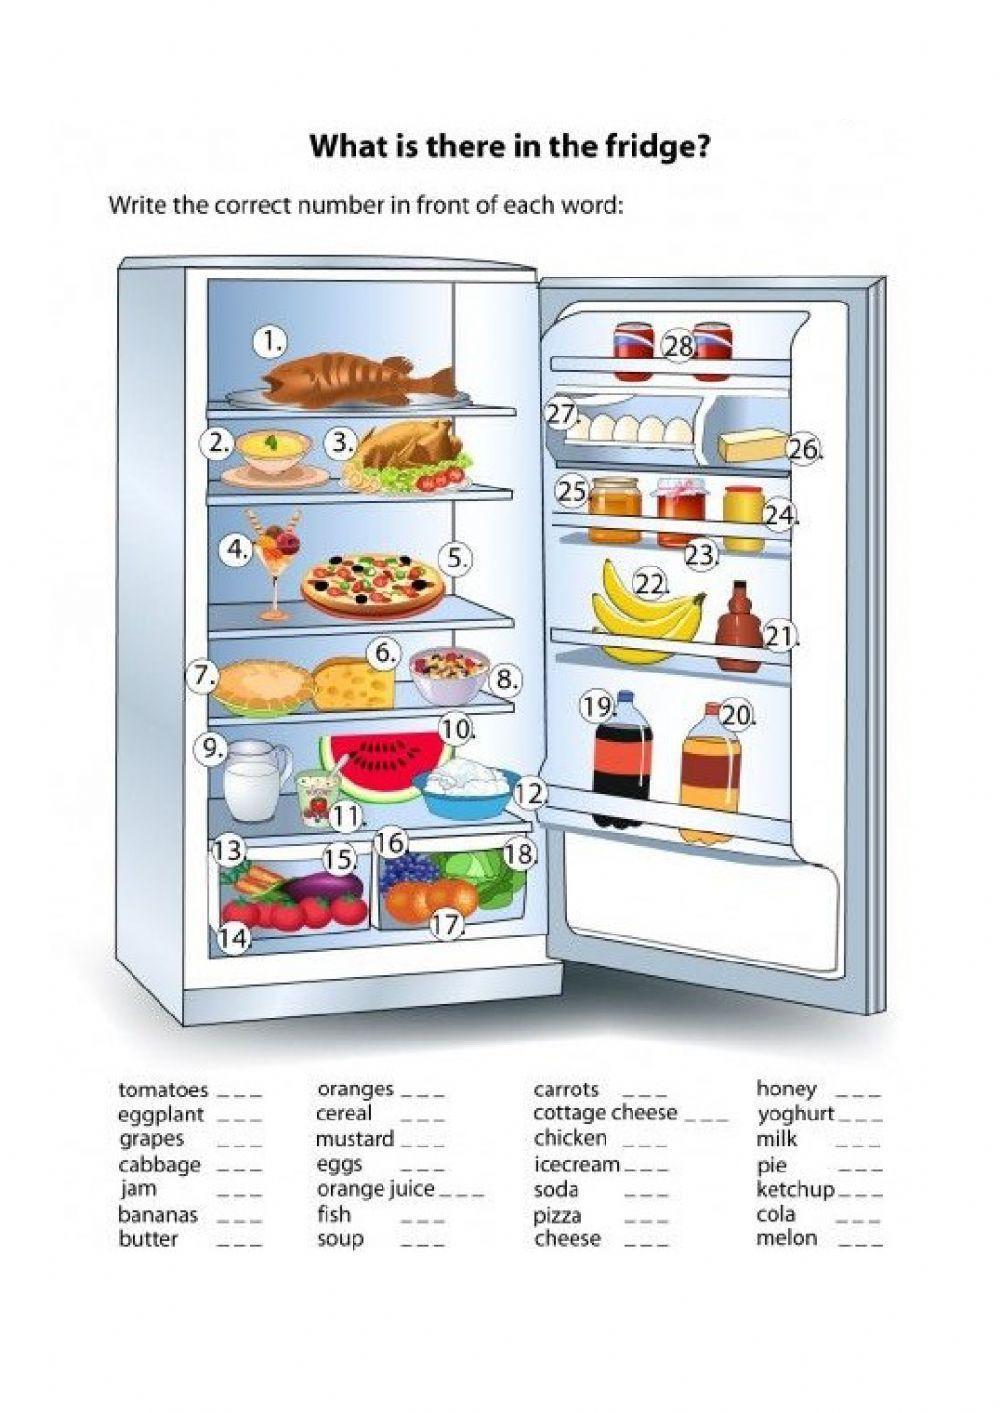 What is in the fridge?